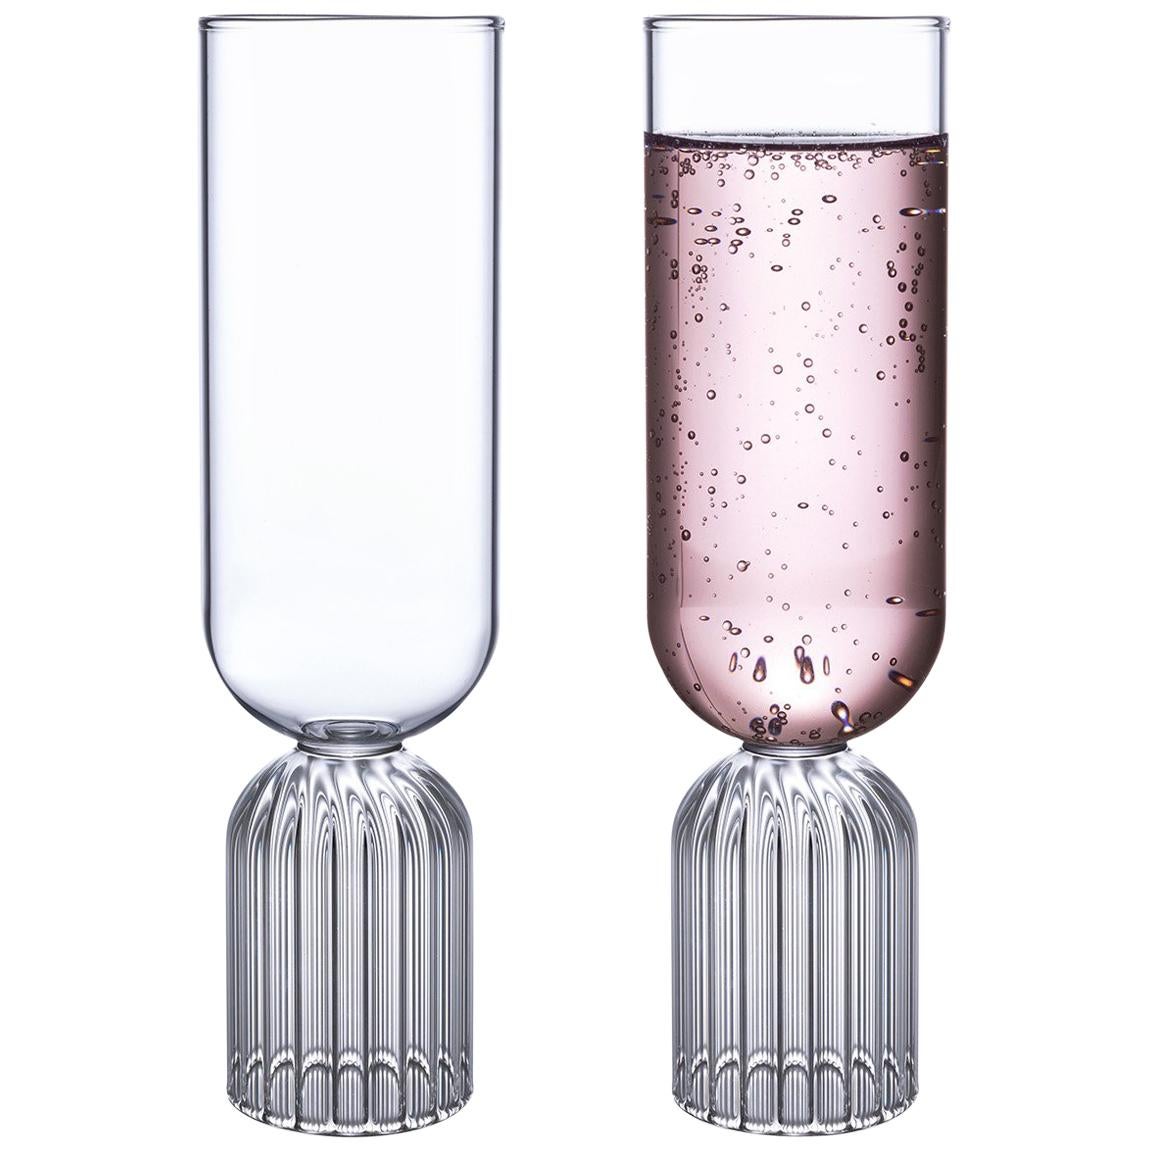 Pair of Czech Contemporary May Champagne Flute Glasses Handmade, in Stock